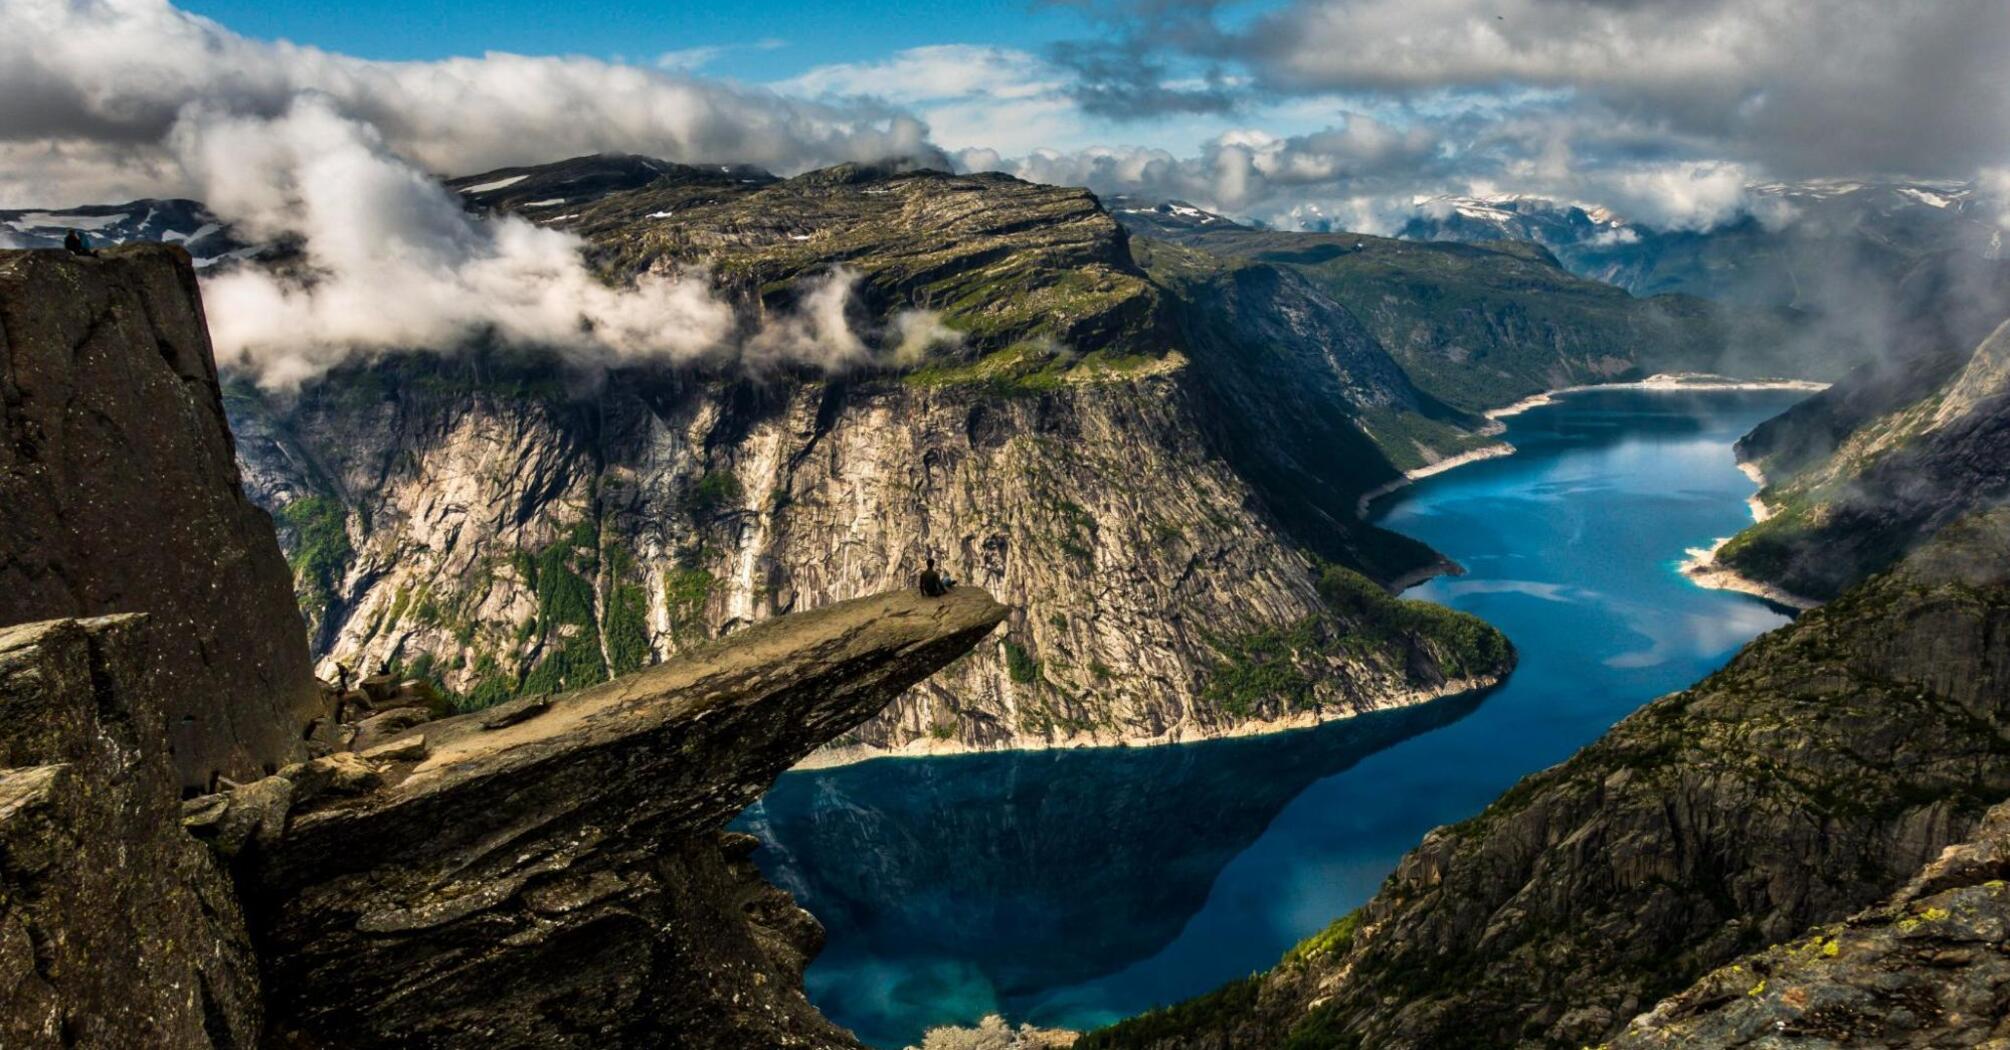 Picturesque landscape of Norway